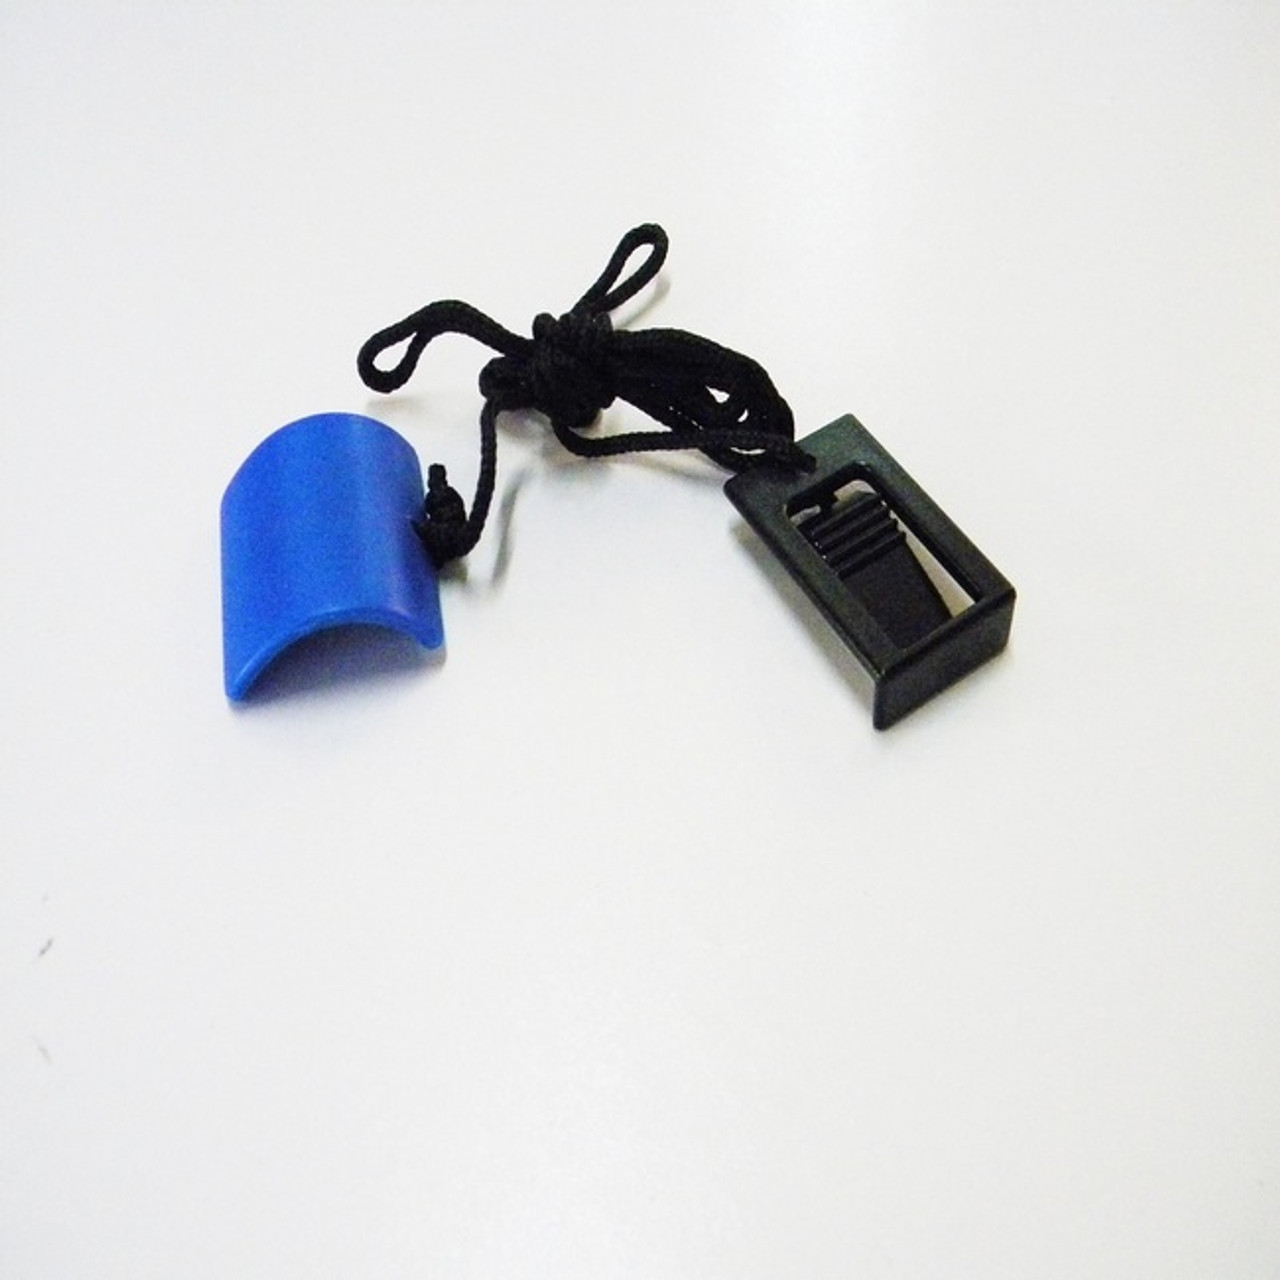 Treadmill Safety Key Part Number 272976 272976 3939